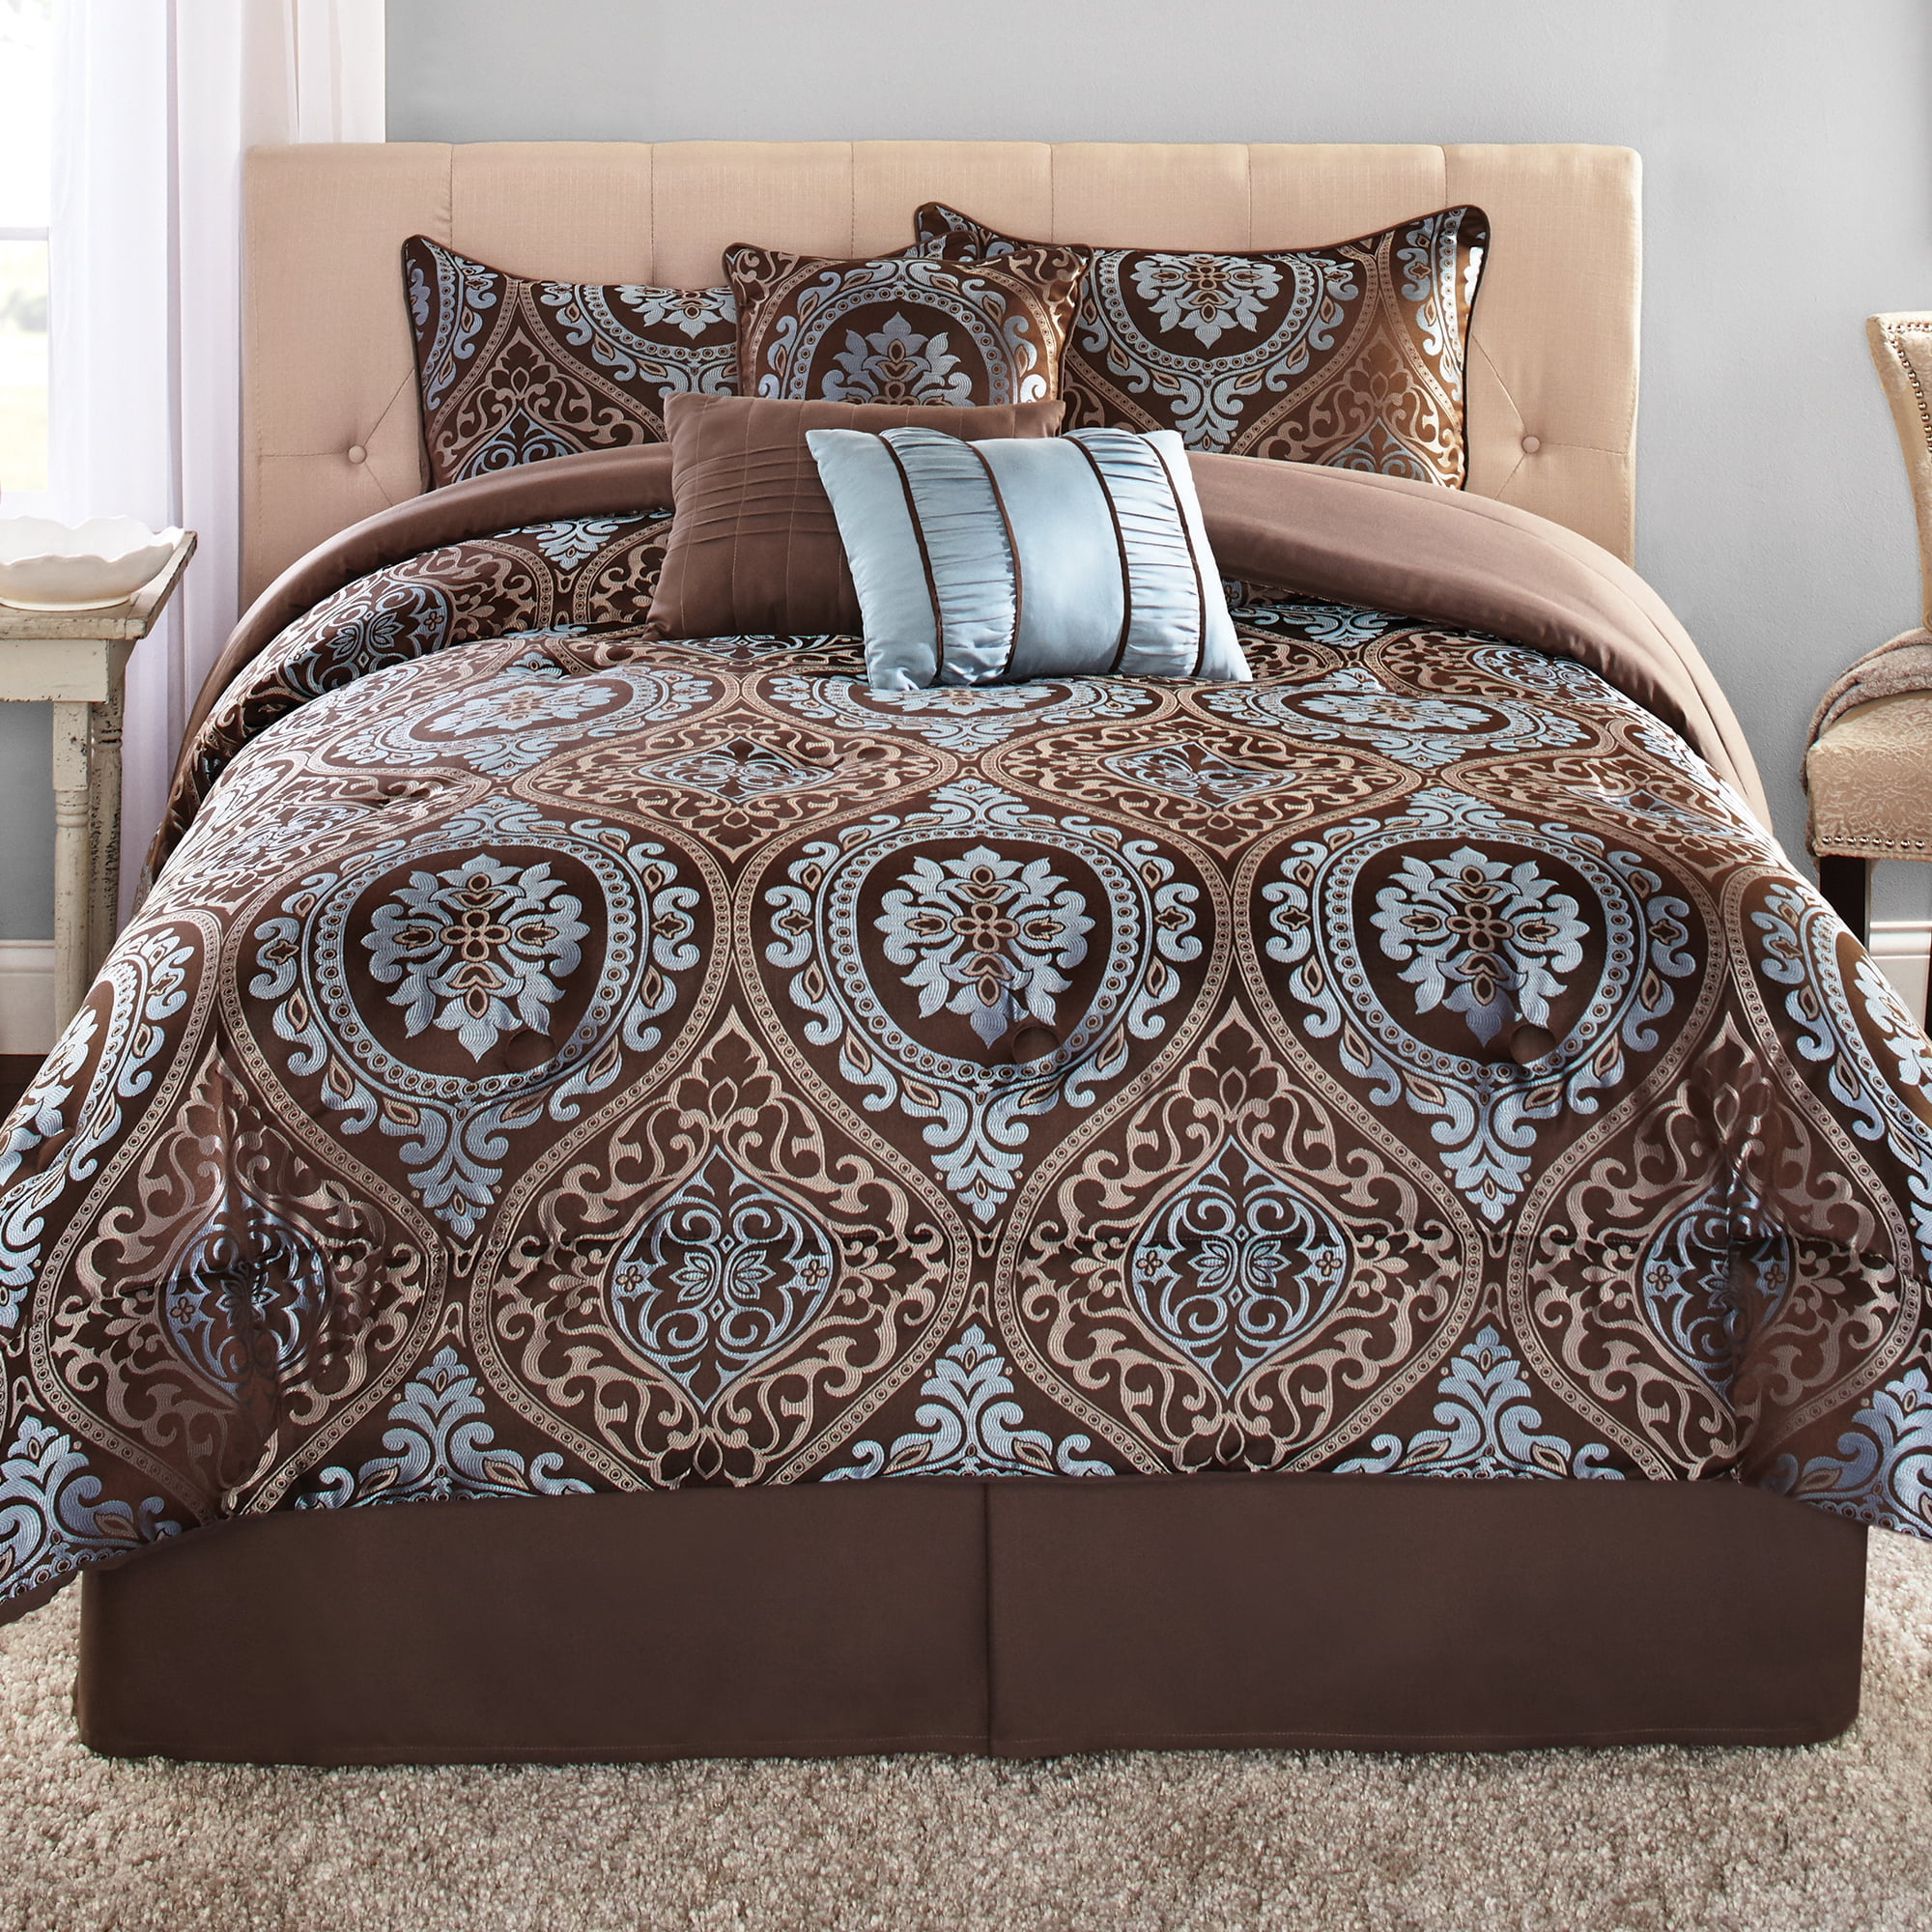 Jacquard Quilted Bedspread Comforter Bedding Set with Eyelet Ring Top Curtains 